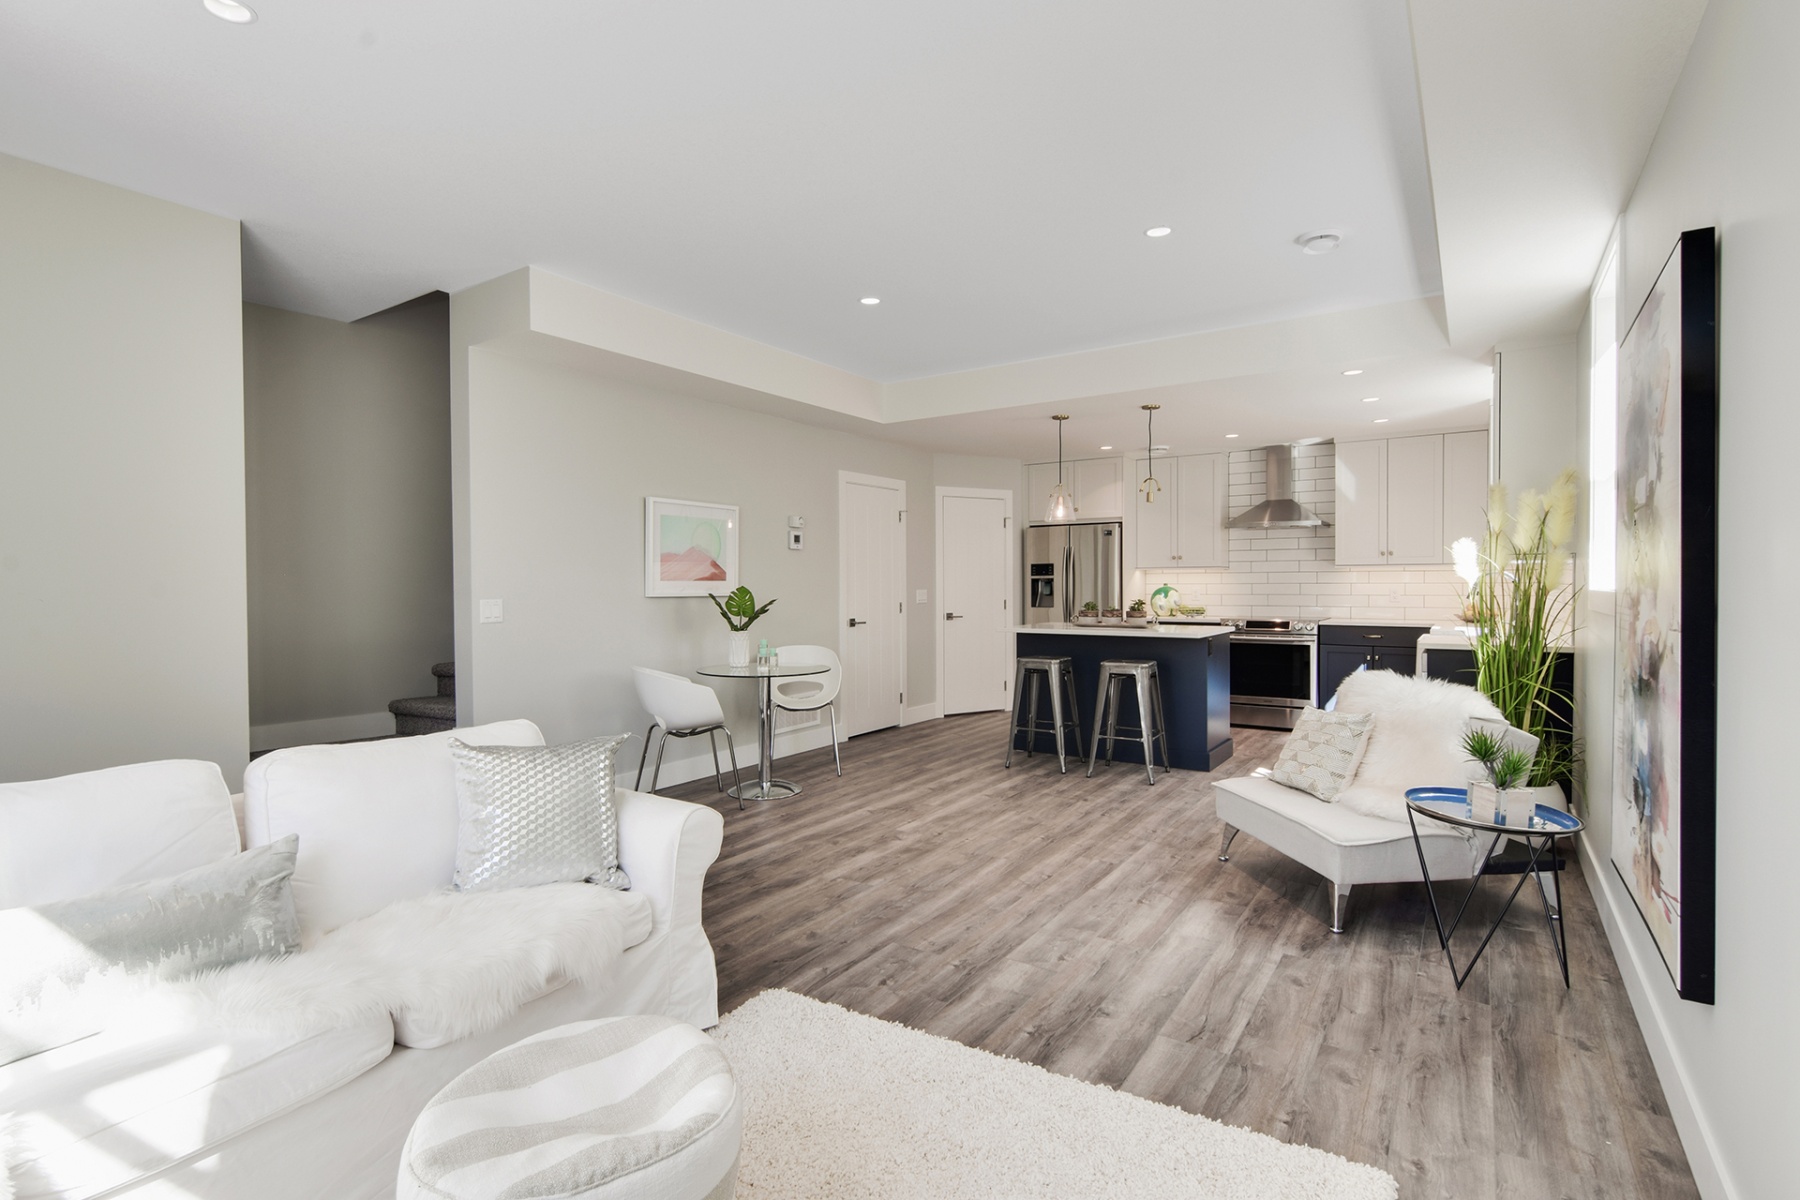 1_harmony_homes_glenwood_infill_project_interior_design_view_gallery_image_12